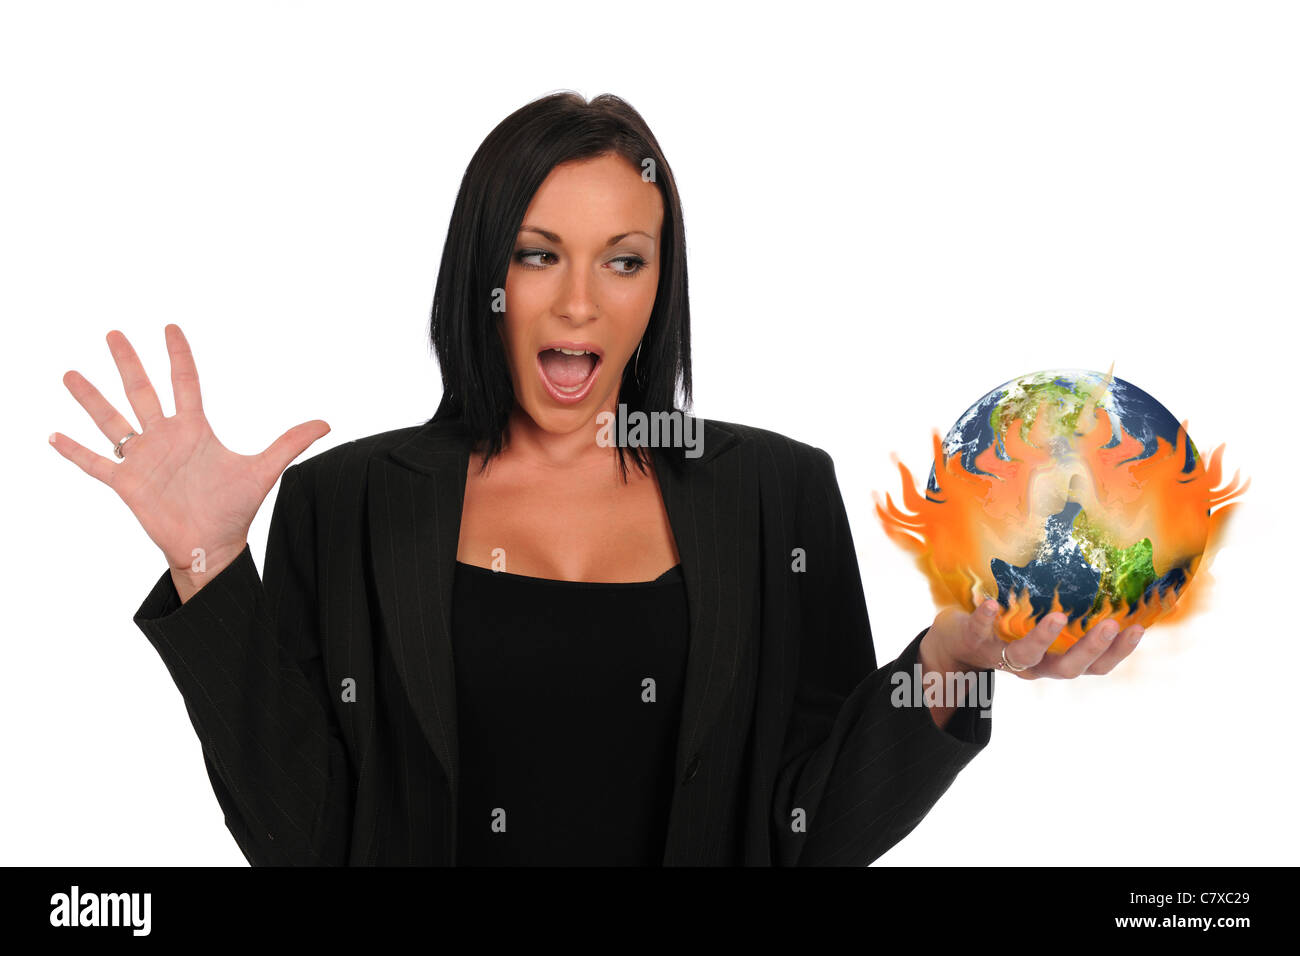 Businesswoman holding the earth on fire as a metaphor for global warming Stock Photo